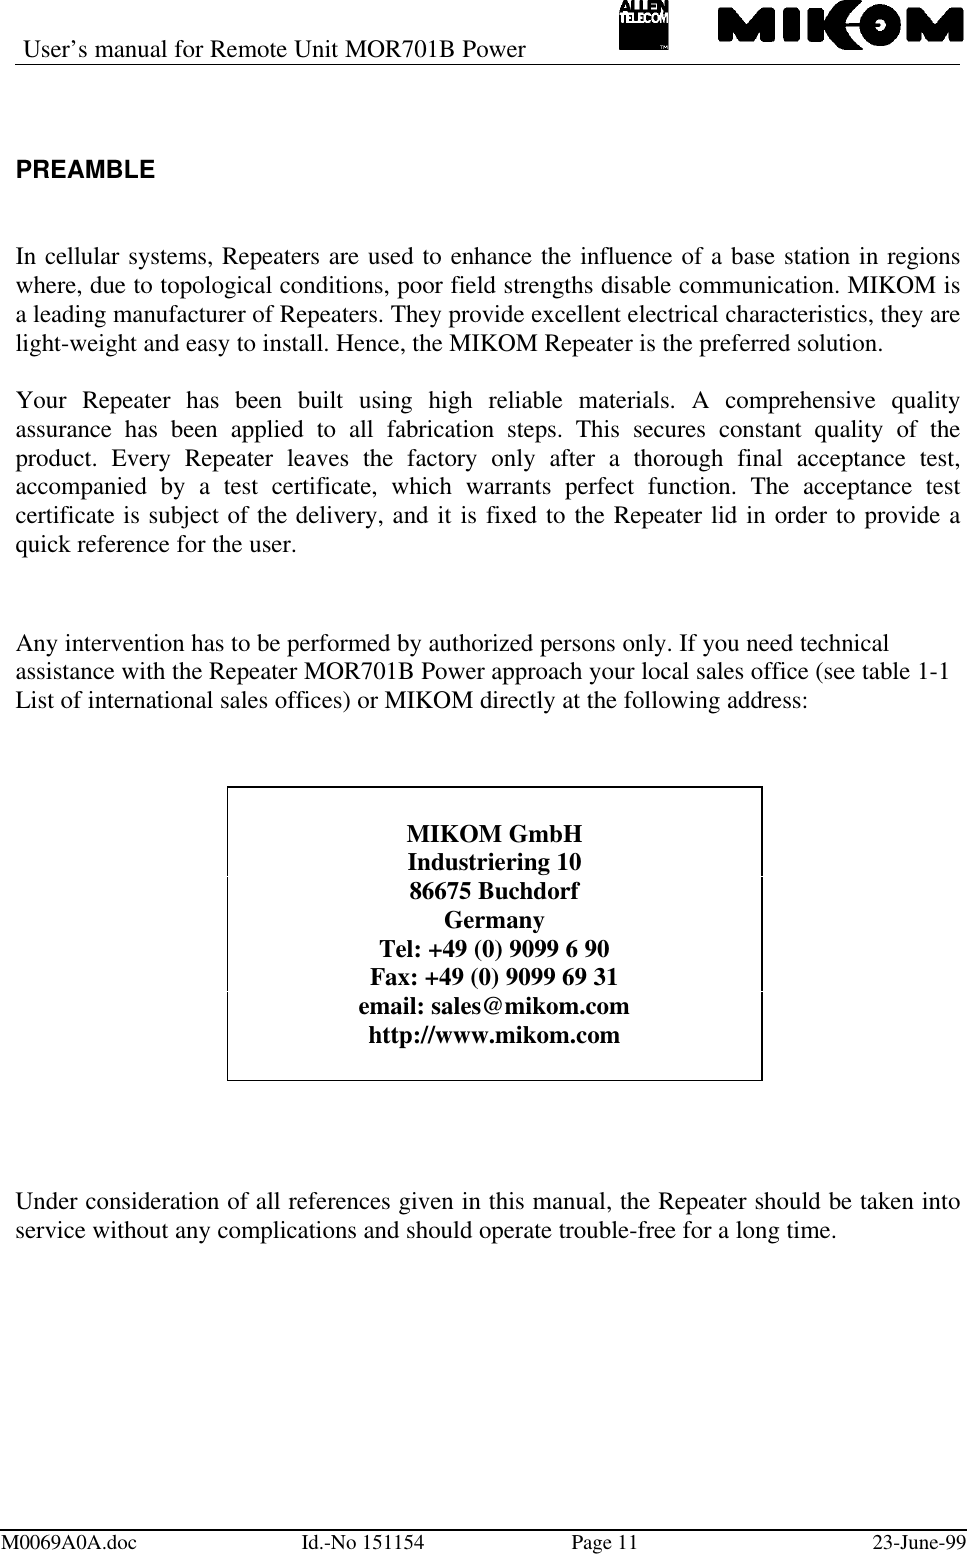 User’s manual for Remote Unit MOR701B PowerM0069A0A.doc Id.-No 151154 Page 11 23-June-99PREAMBLEIn cellular systems, Repeaters are used to enhance the influence of a base station in regionswhere, due to topological conditions, poor field strengths disable communication. MIKOM isa leading manufacturer of Repeaters. They provide excellent electrical characteristics, they arelight-weight and easy to install. Hence, the MIKOM Repeater is the preferred solution.Your Repeater has been built using high reliable materials. A comprehensive qualityassurance has been applied to all fabrication steps. This secures constant quality of theproduct. Every Repeater leaves the factory only after a thorough final acceptance test,accompanied by a test certificate, which warrants perfect function. The acceptance testcertificate is subject of the delivery, and it is fixed to the Repeater lid in order to provide aquick reference for the user.Any intervention has to be performed by authorized persons only. If you need technicalassistance with the Repeater MOR701B Power approach your local sales office (see table 1-1List of international sales offices) or MIKOM directly at the following address:Under consideration of all references given in this manual, the Repeater should be taken intoservice without any complications and should operate trouble-free for a long time.MIKOM GmbHIndustriering 1086675 BuchdorfGermanyTel: +49 (0) 9099 6 90Fax: +49 (0) 9099 69 31email: sales@mikom.comhttp://www.mikom.com